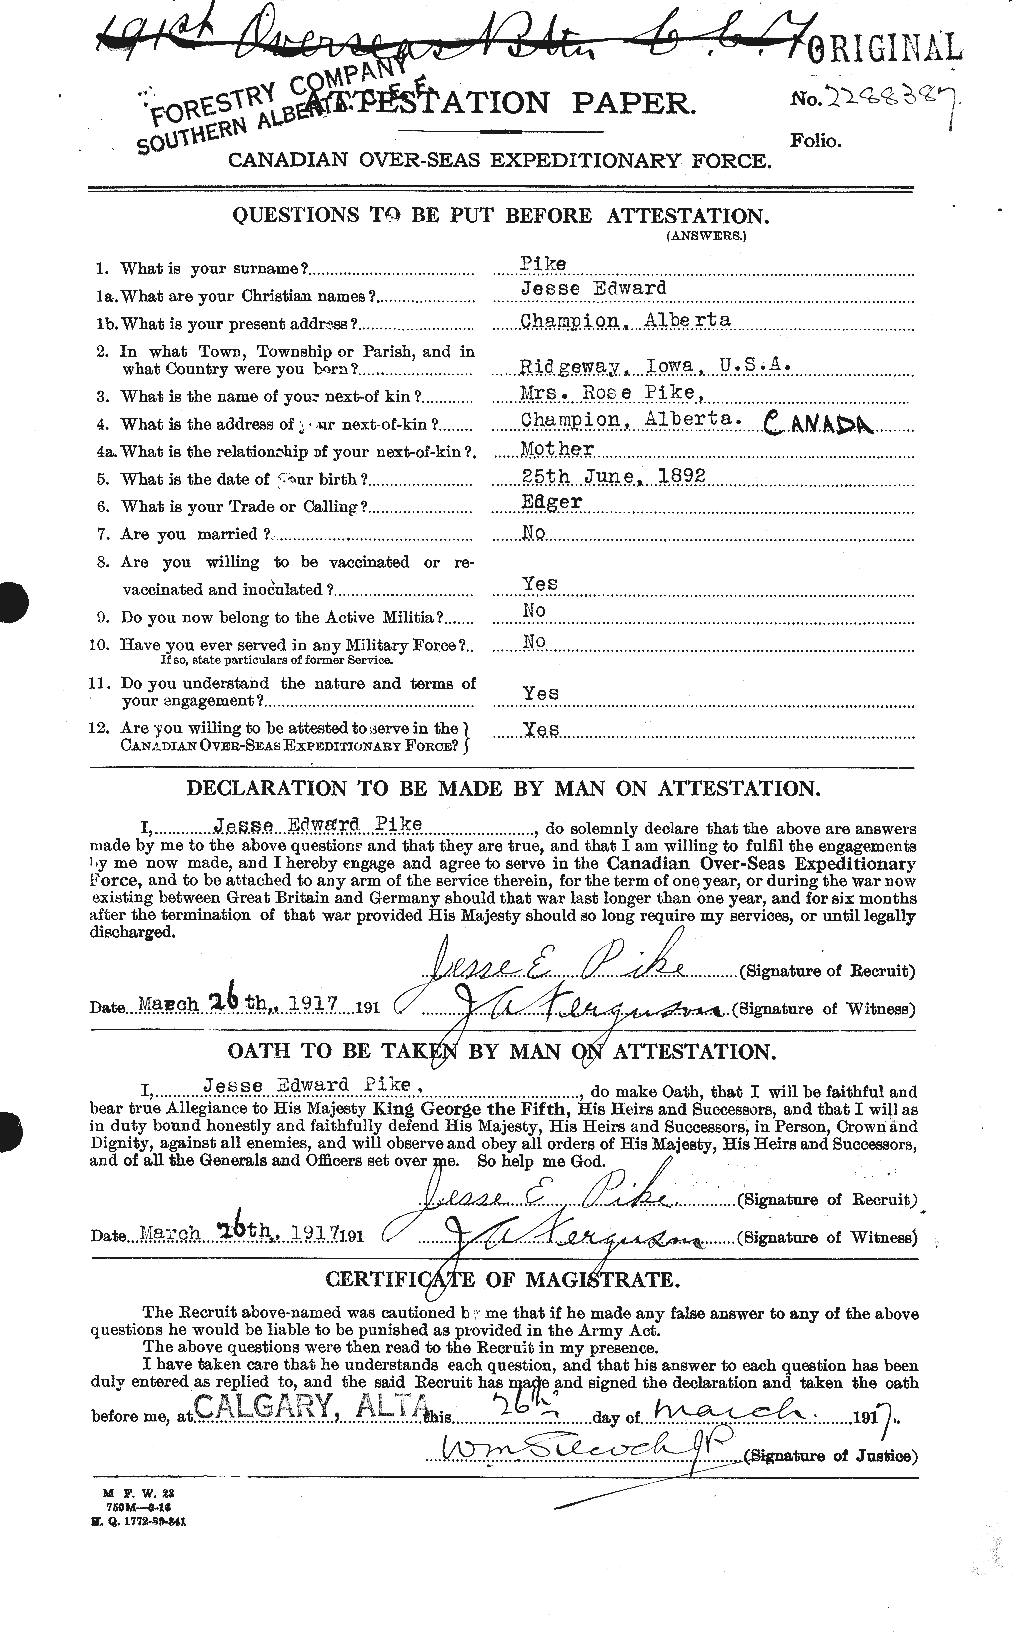 Personnel Records of the First World War - CEF 582192a